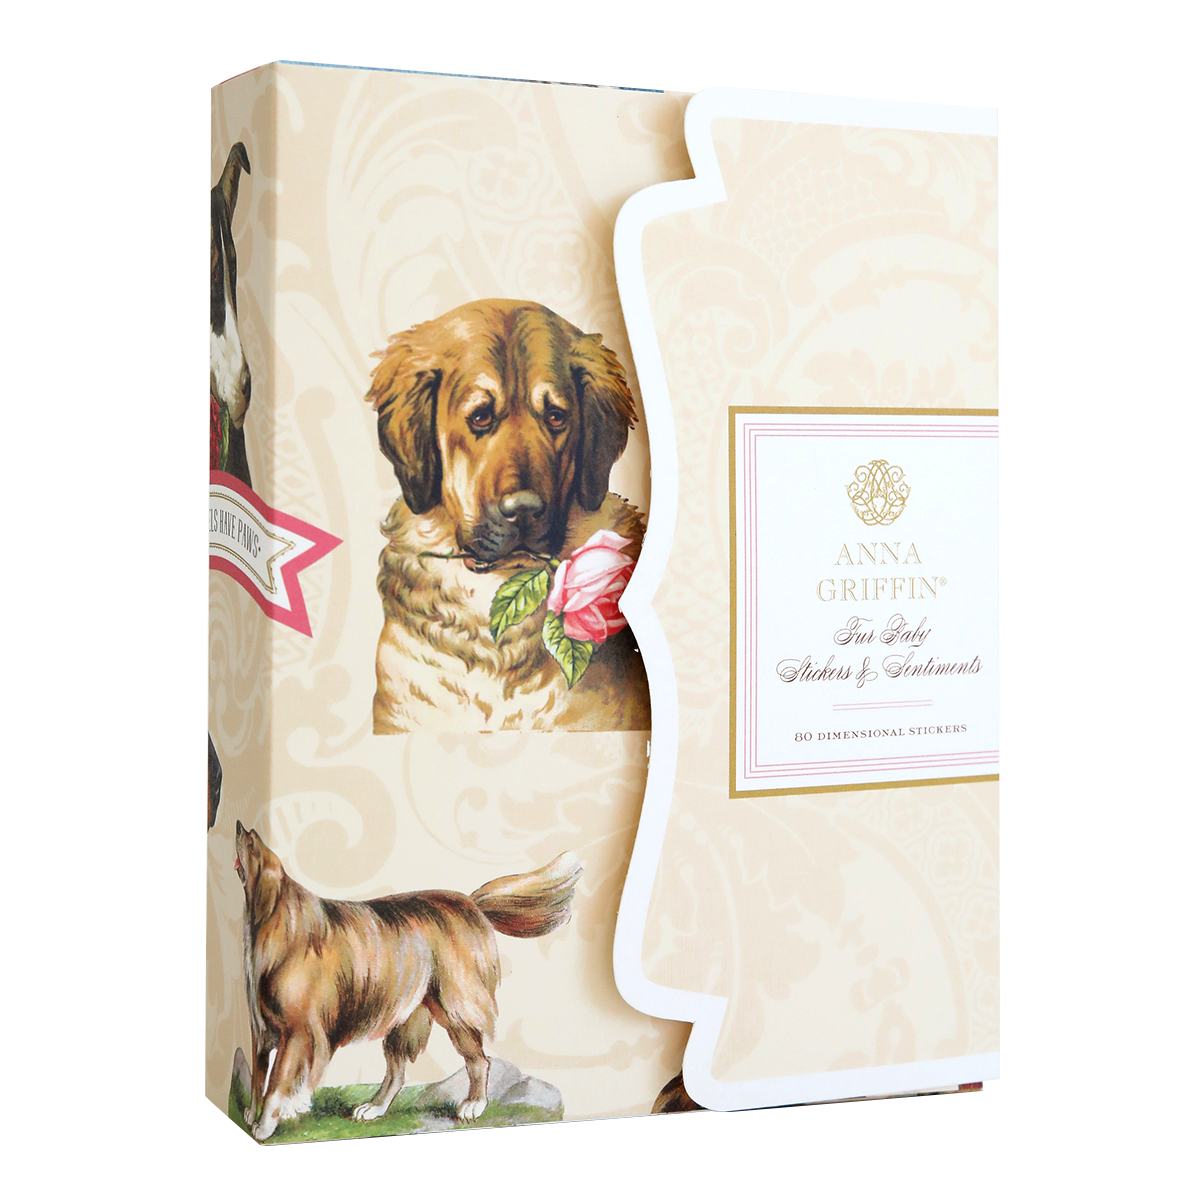 Decorative stationery box featuring images of dogs and floral elements with the text "Fur Baby Dog Stickers and Sentiments" for scrapbook pages and 80 dog embellishments.